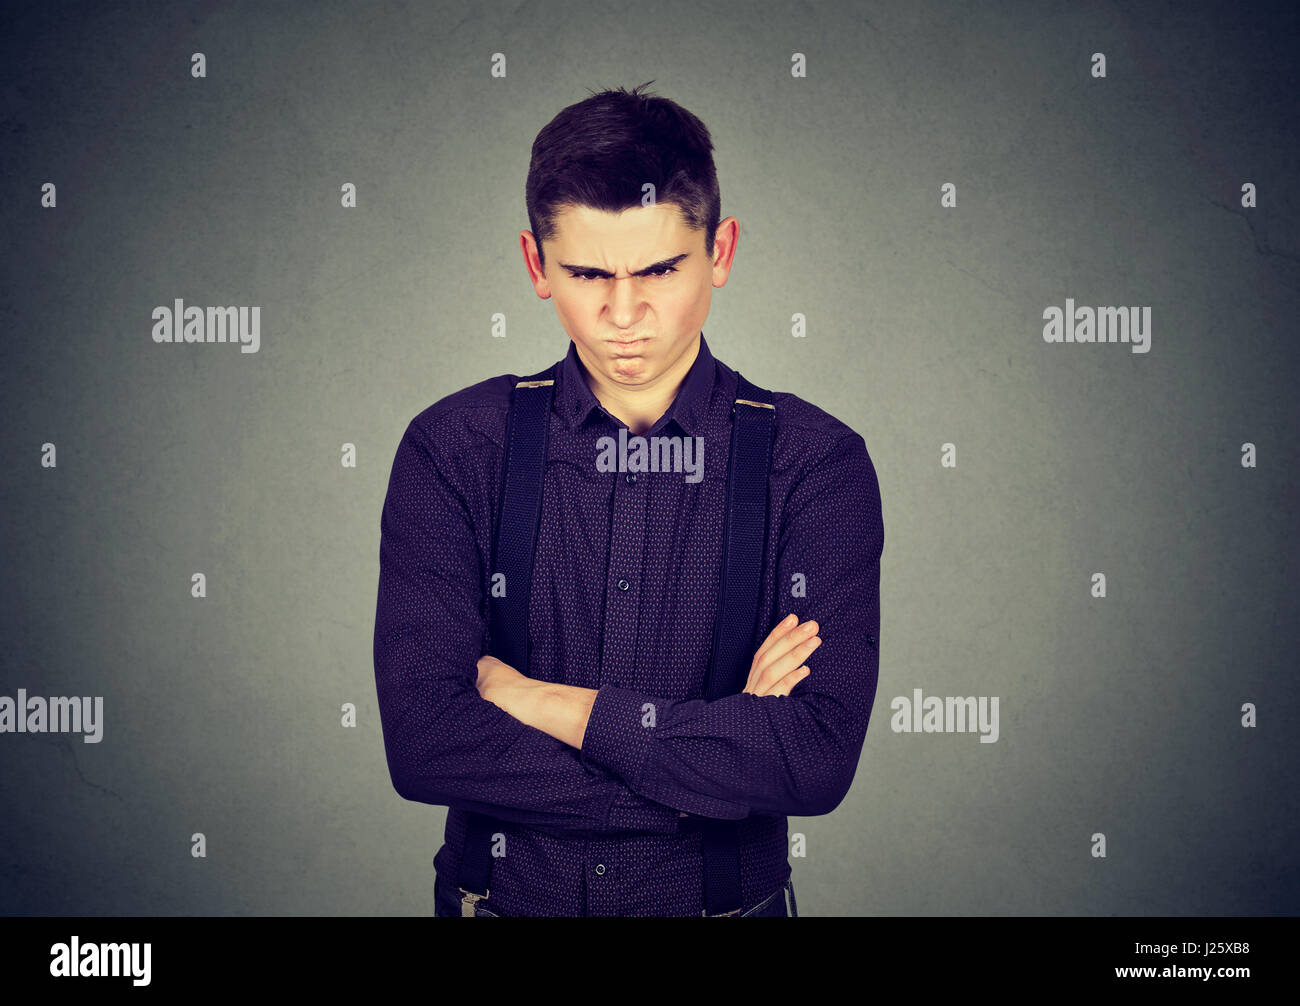 Angry grumpy man looking very displeased isolated on gray wall background. Negative human emotions facial expression Stock Photo